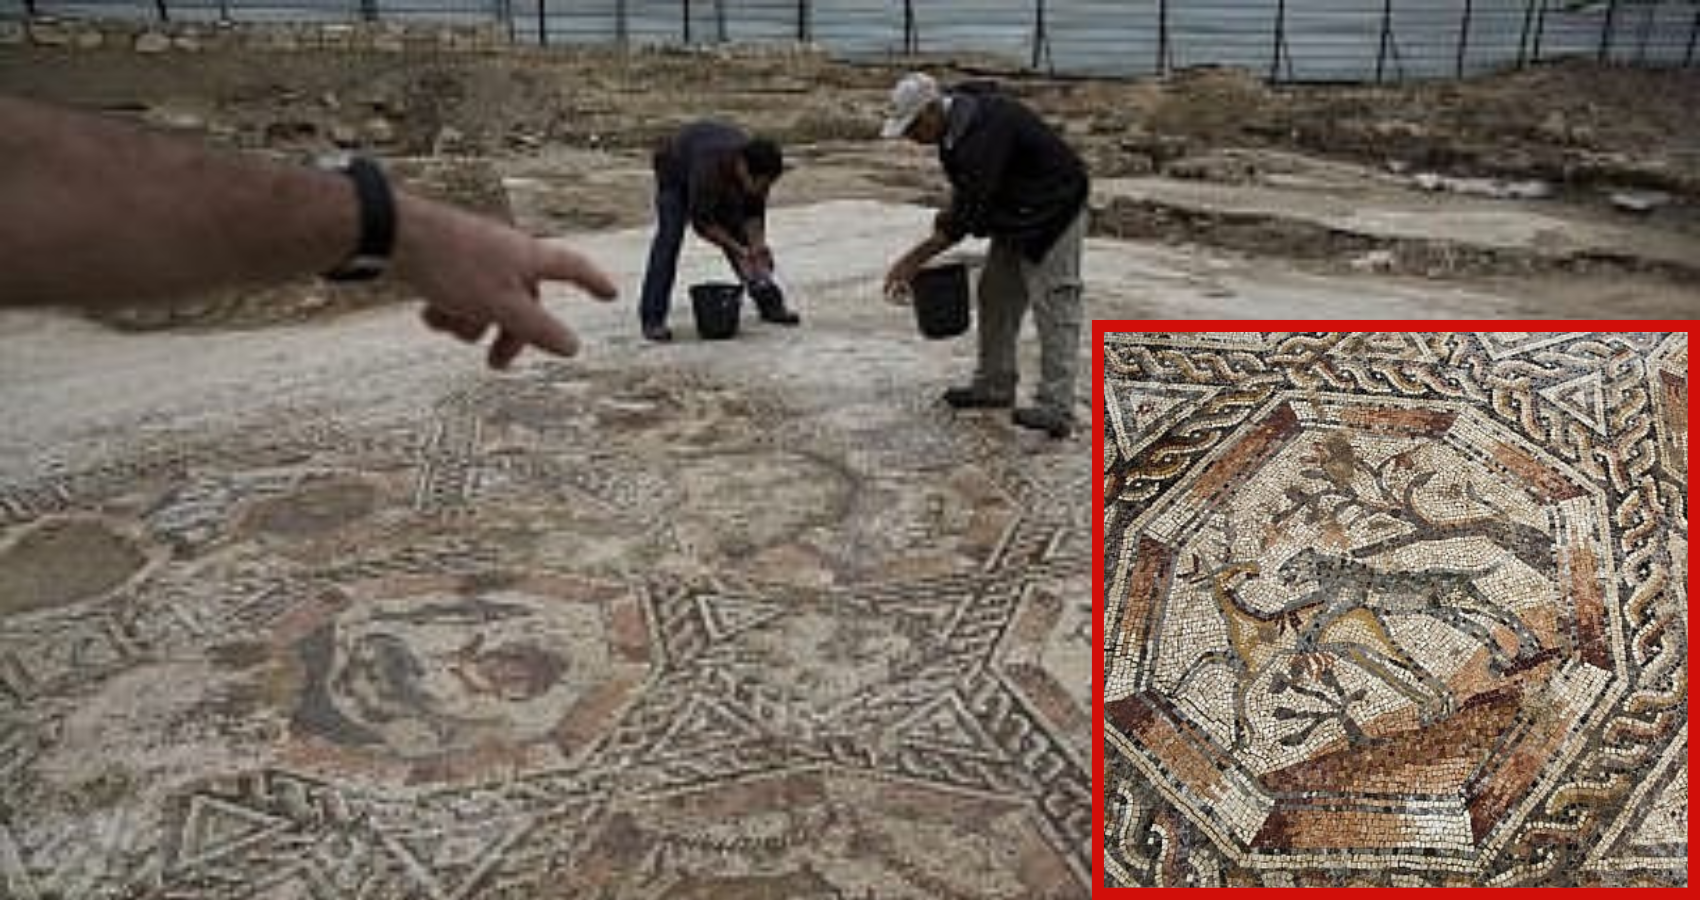 Israel uncovers Roman mosaic as it builds visitors’ center for earlier find